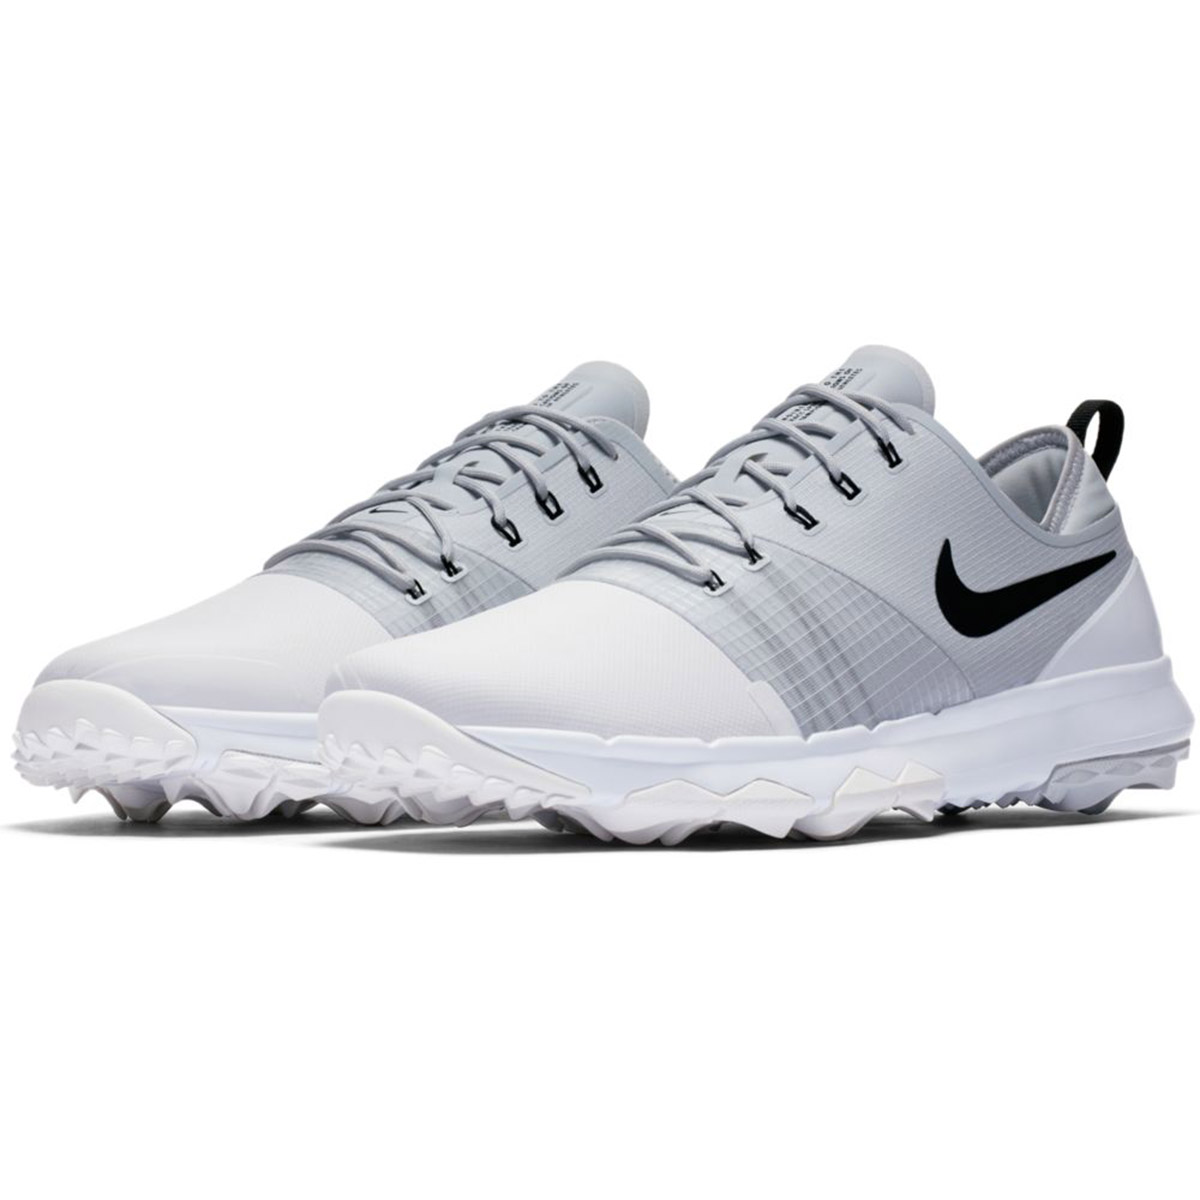 Nike Golf FI Impact 3 Shoes from 